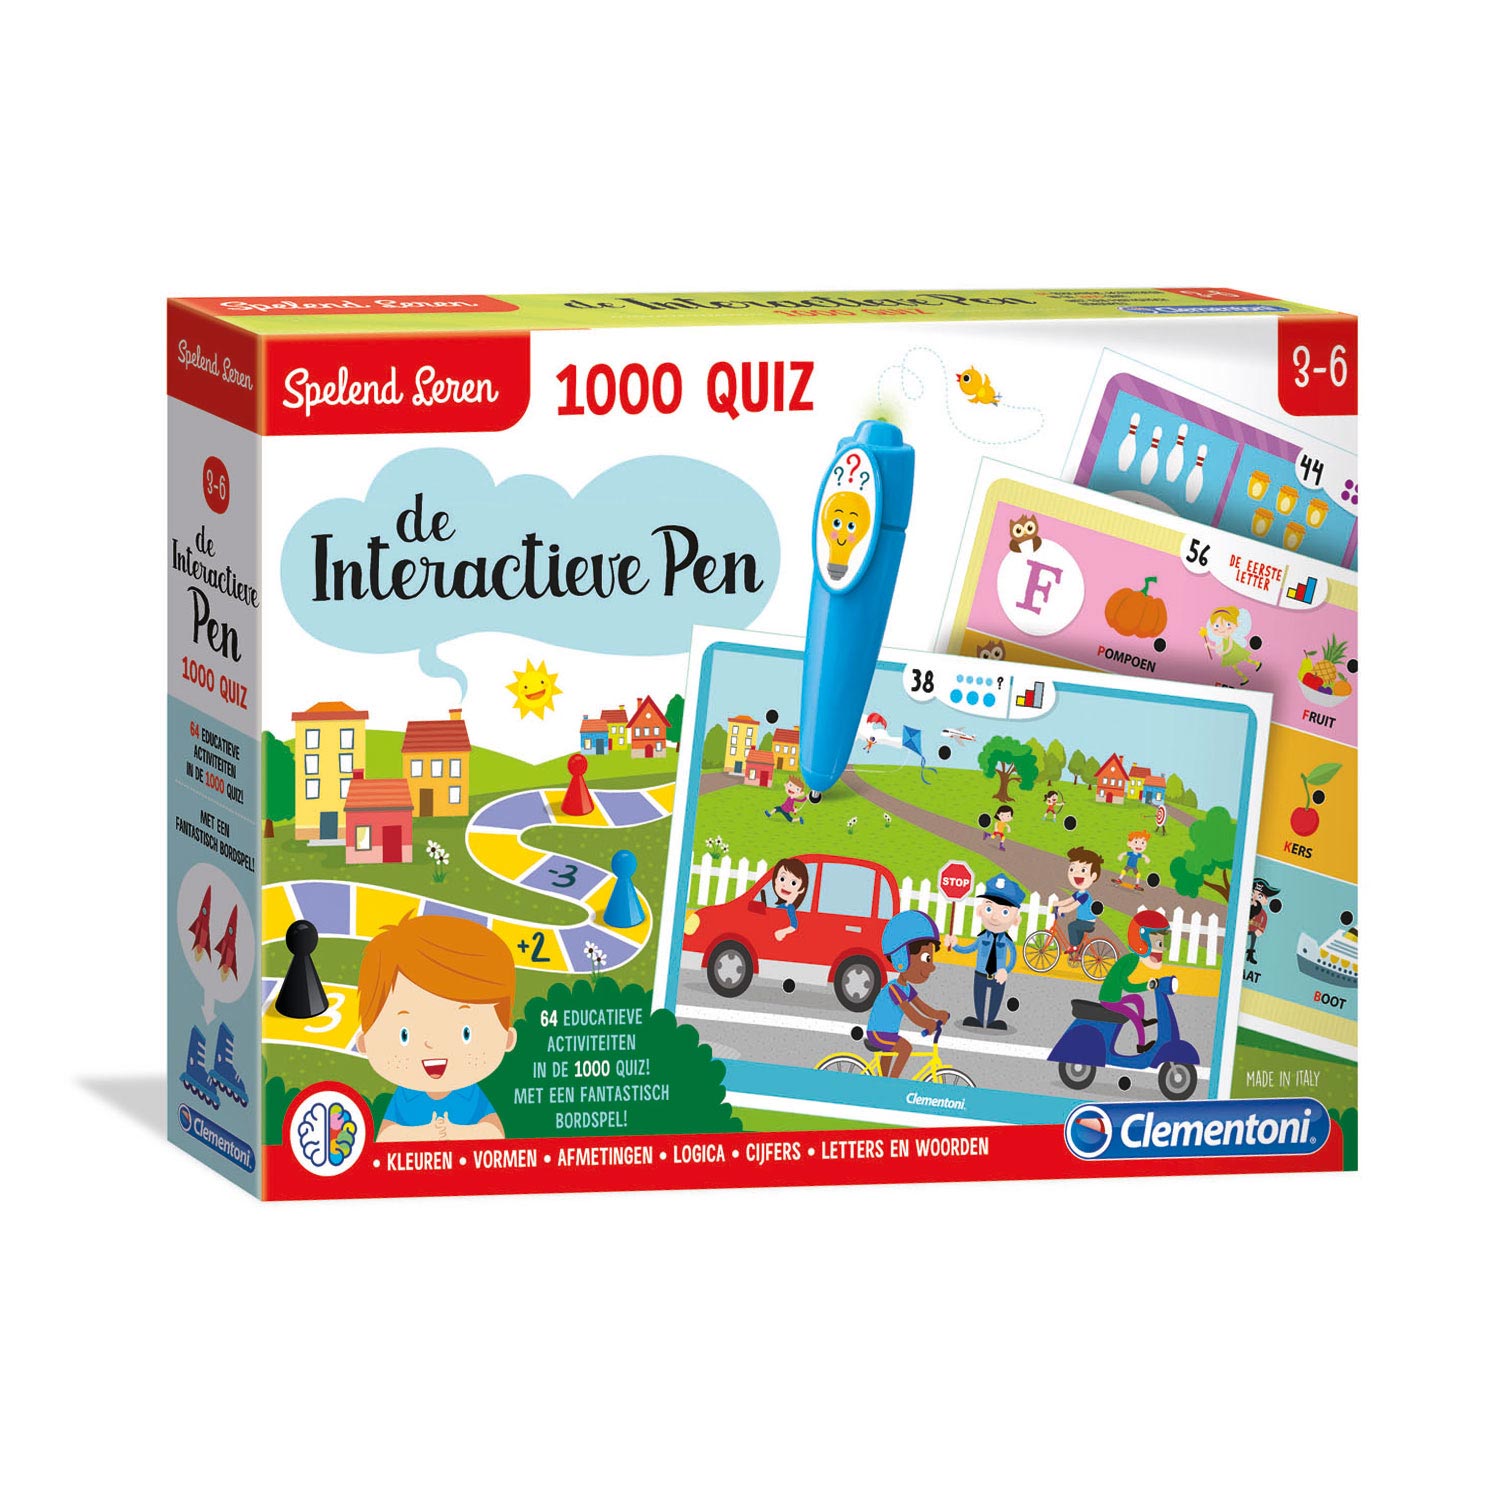 PAW Patrol Chase, Skye, Marshall and More! – Quiz it Pen 4-Book